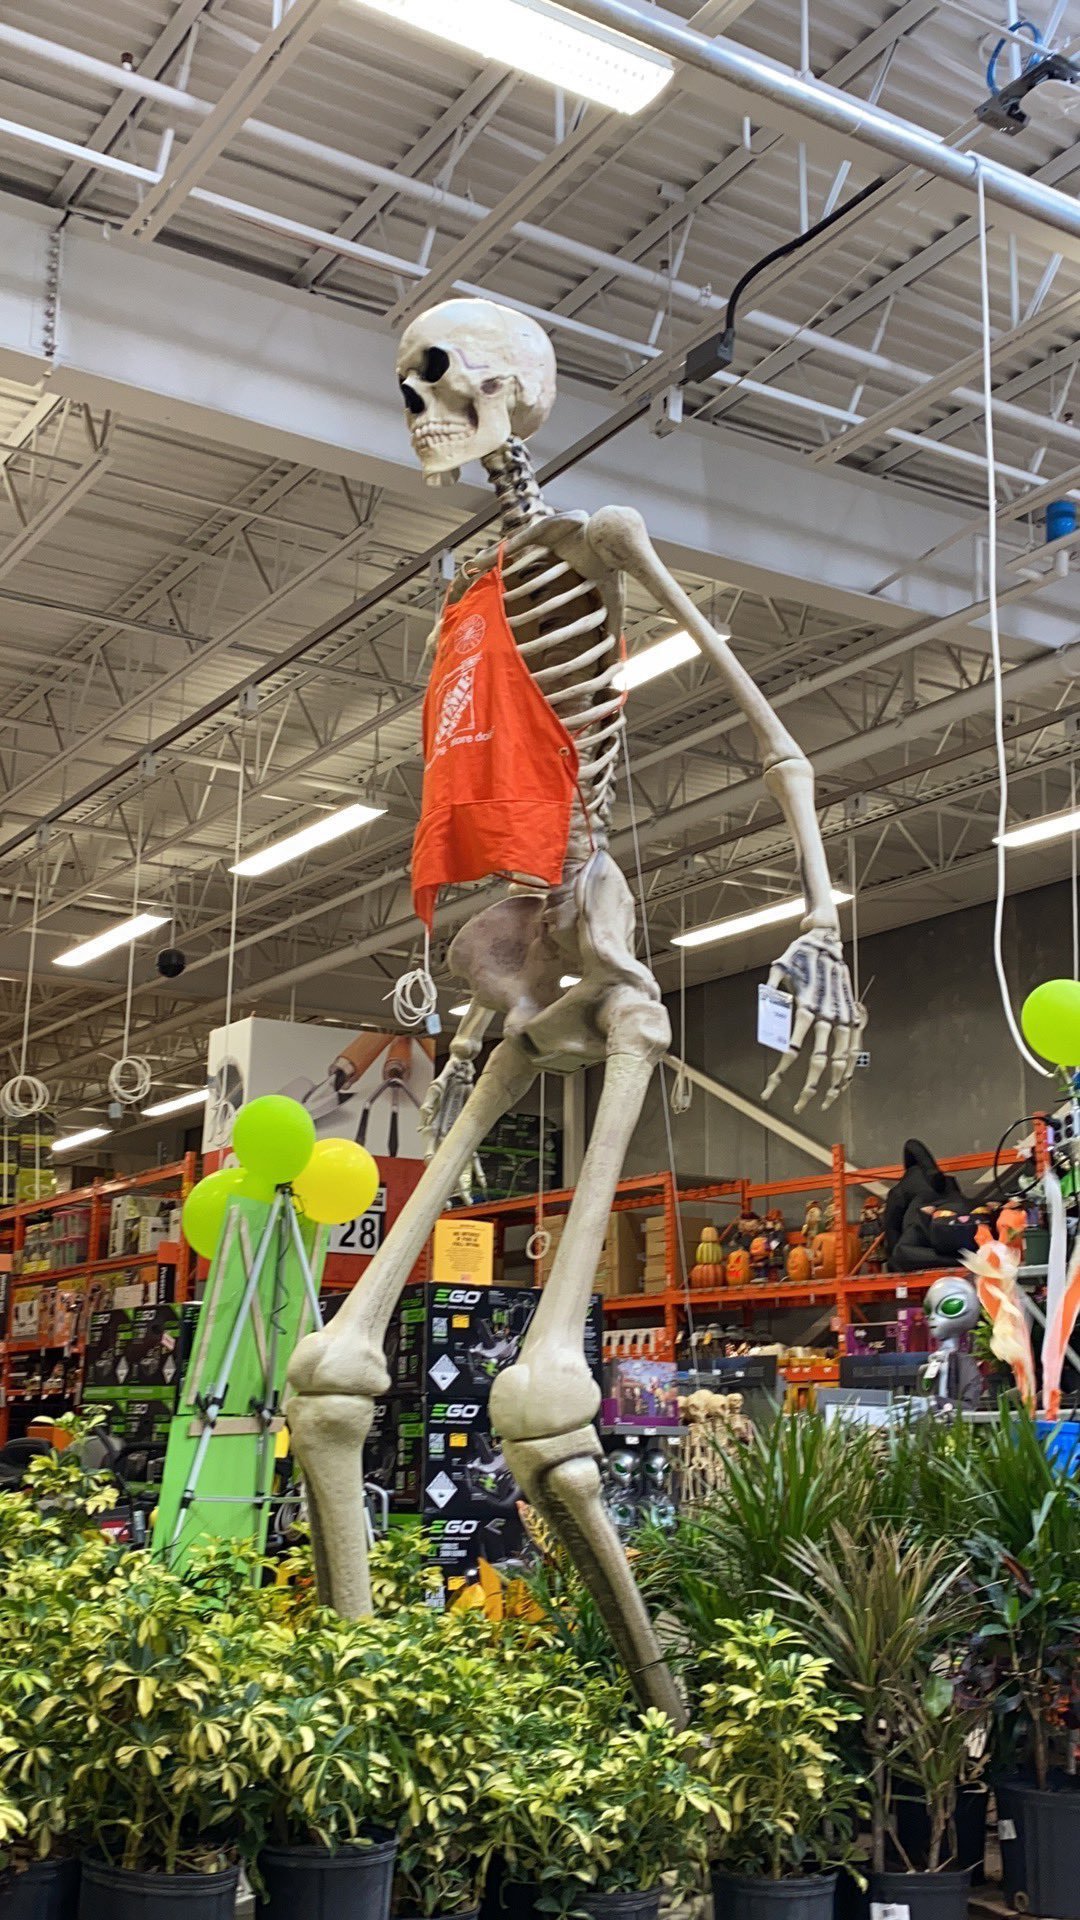 K Mpany On Tour On Twitter I Will Do Whatever It Takes To Acquire The Giant Home Depot Skeleton Https T Co Cq3tiuqdtq Twitter